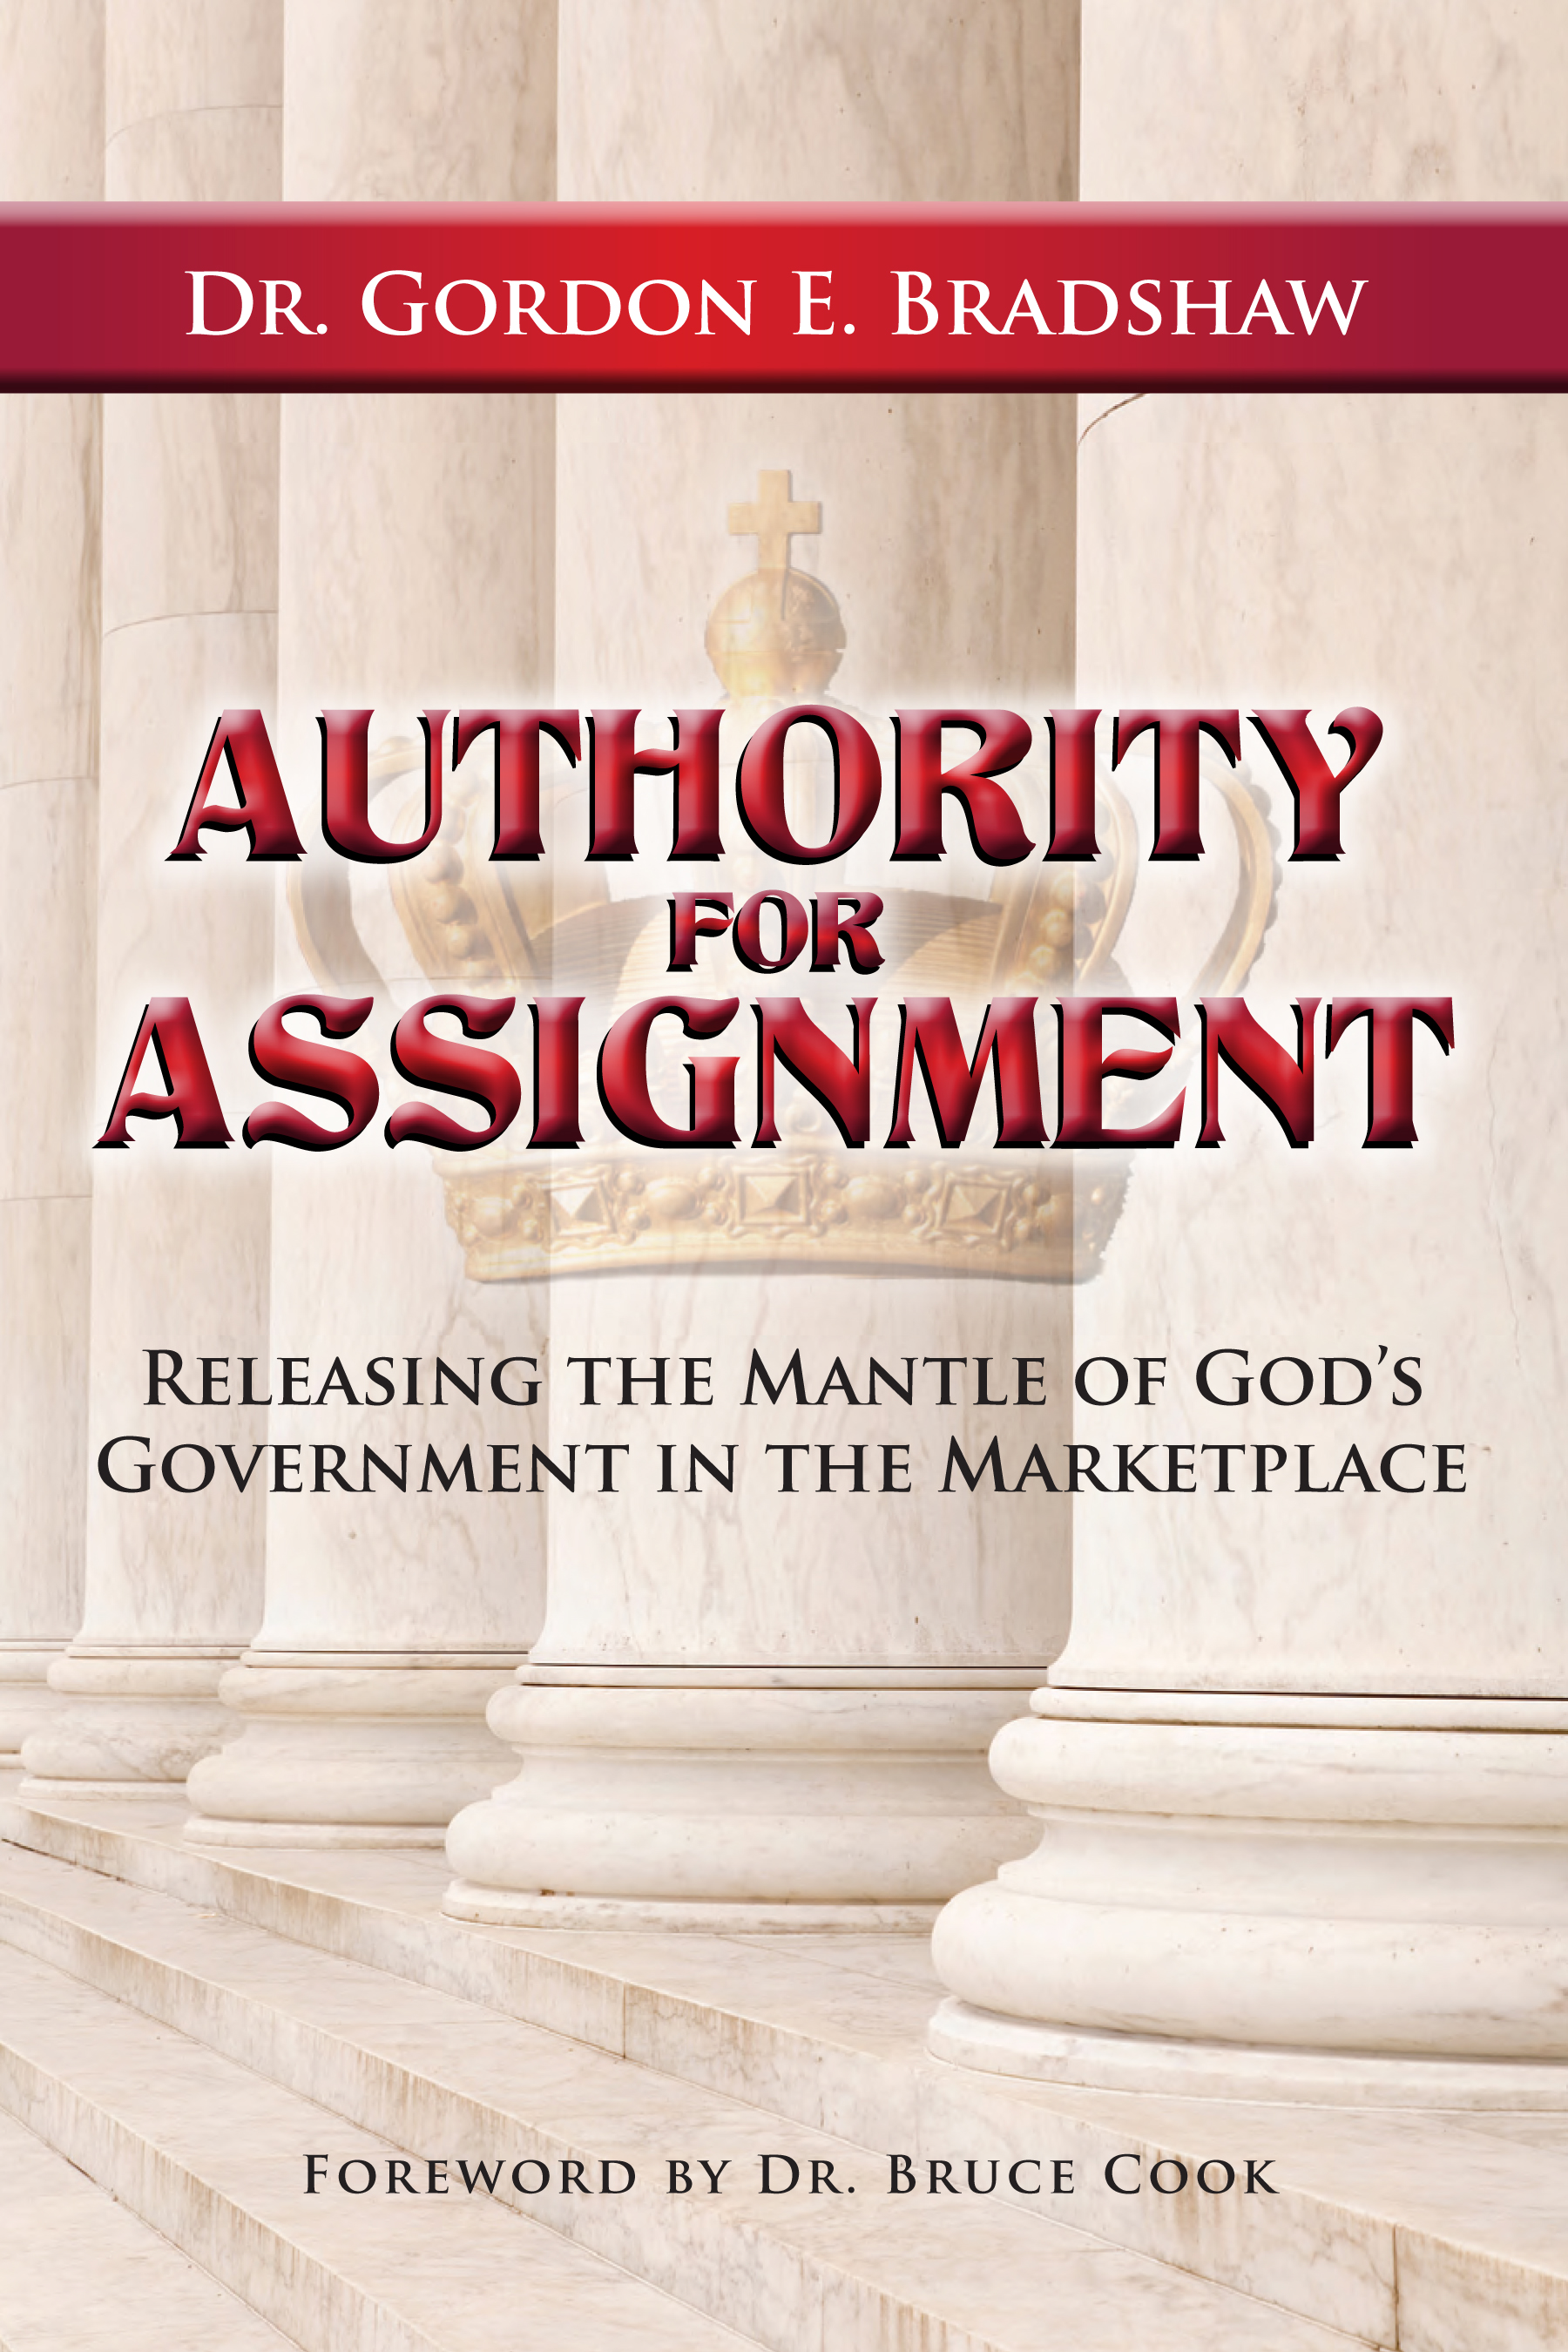 Authority for Assignment - Releasing the Mantle of God's Government in the Marketplace